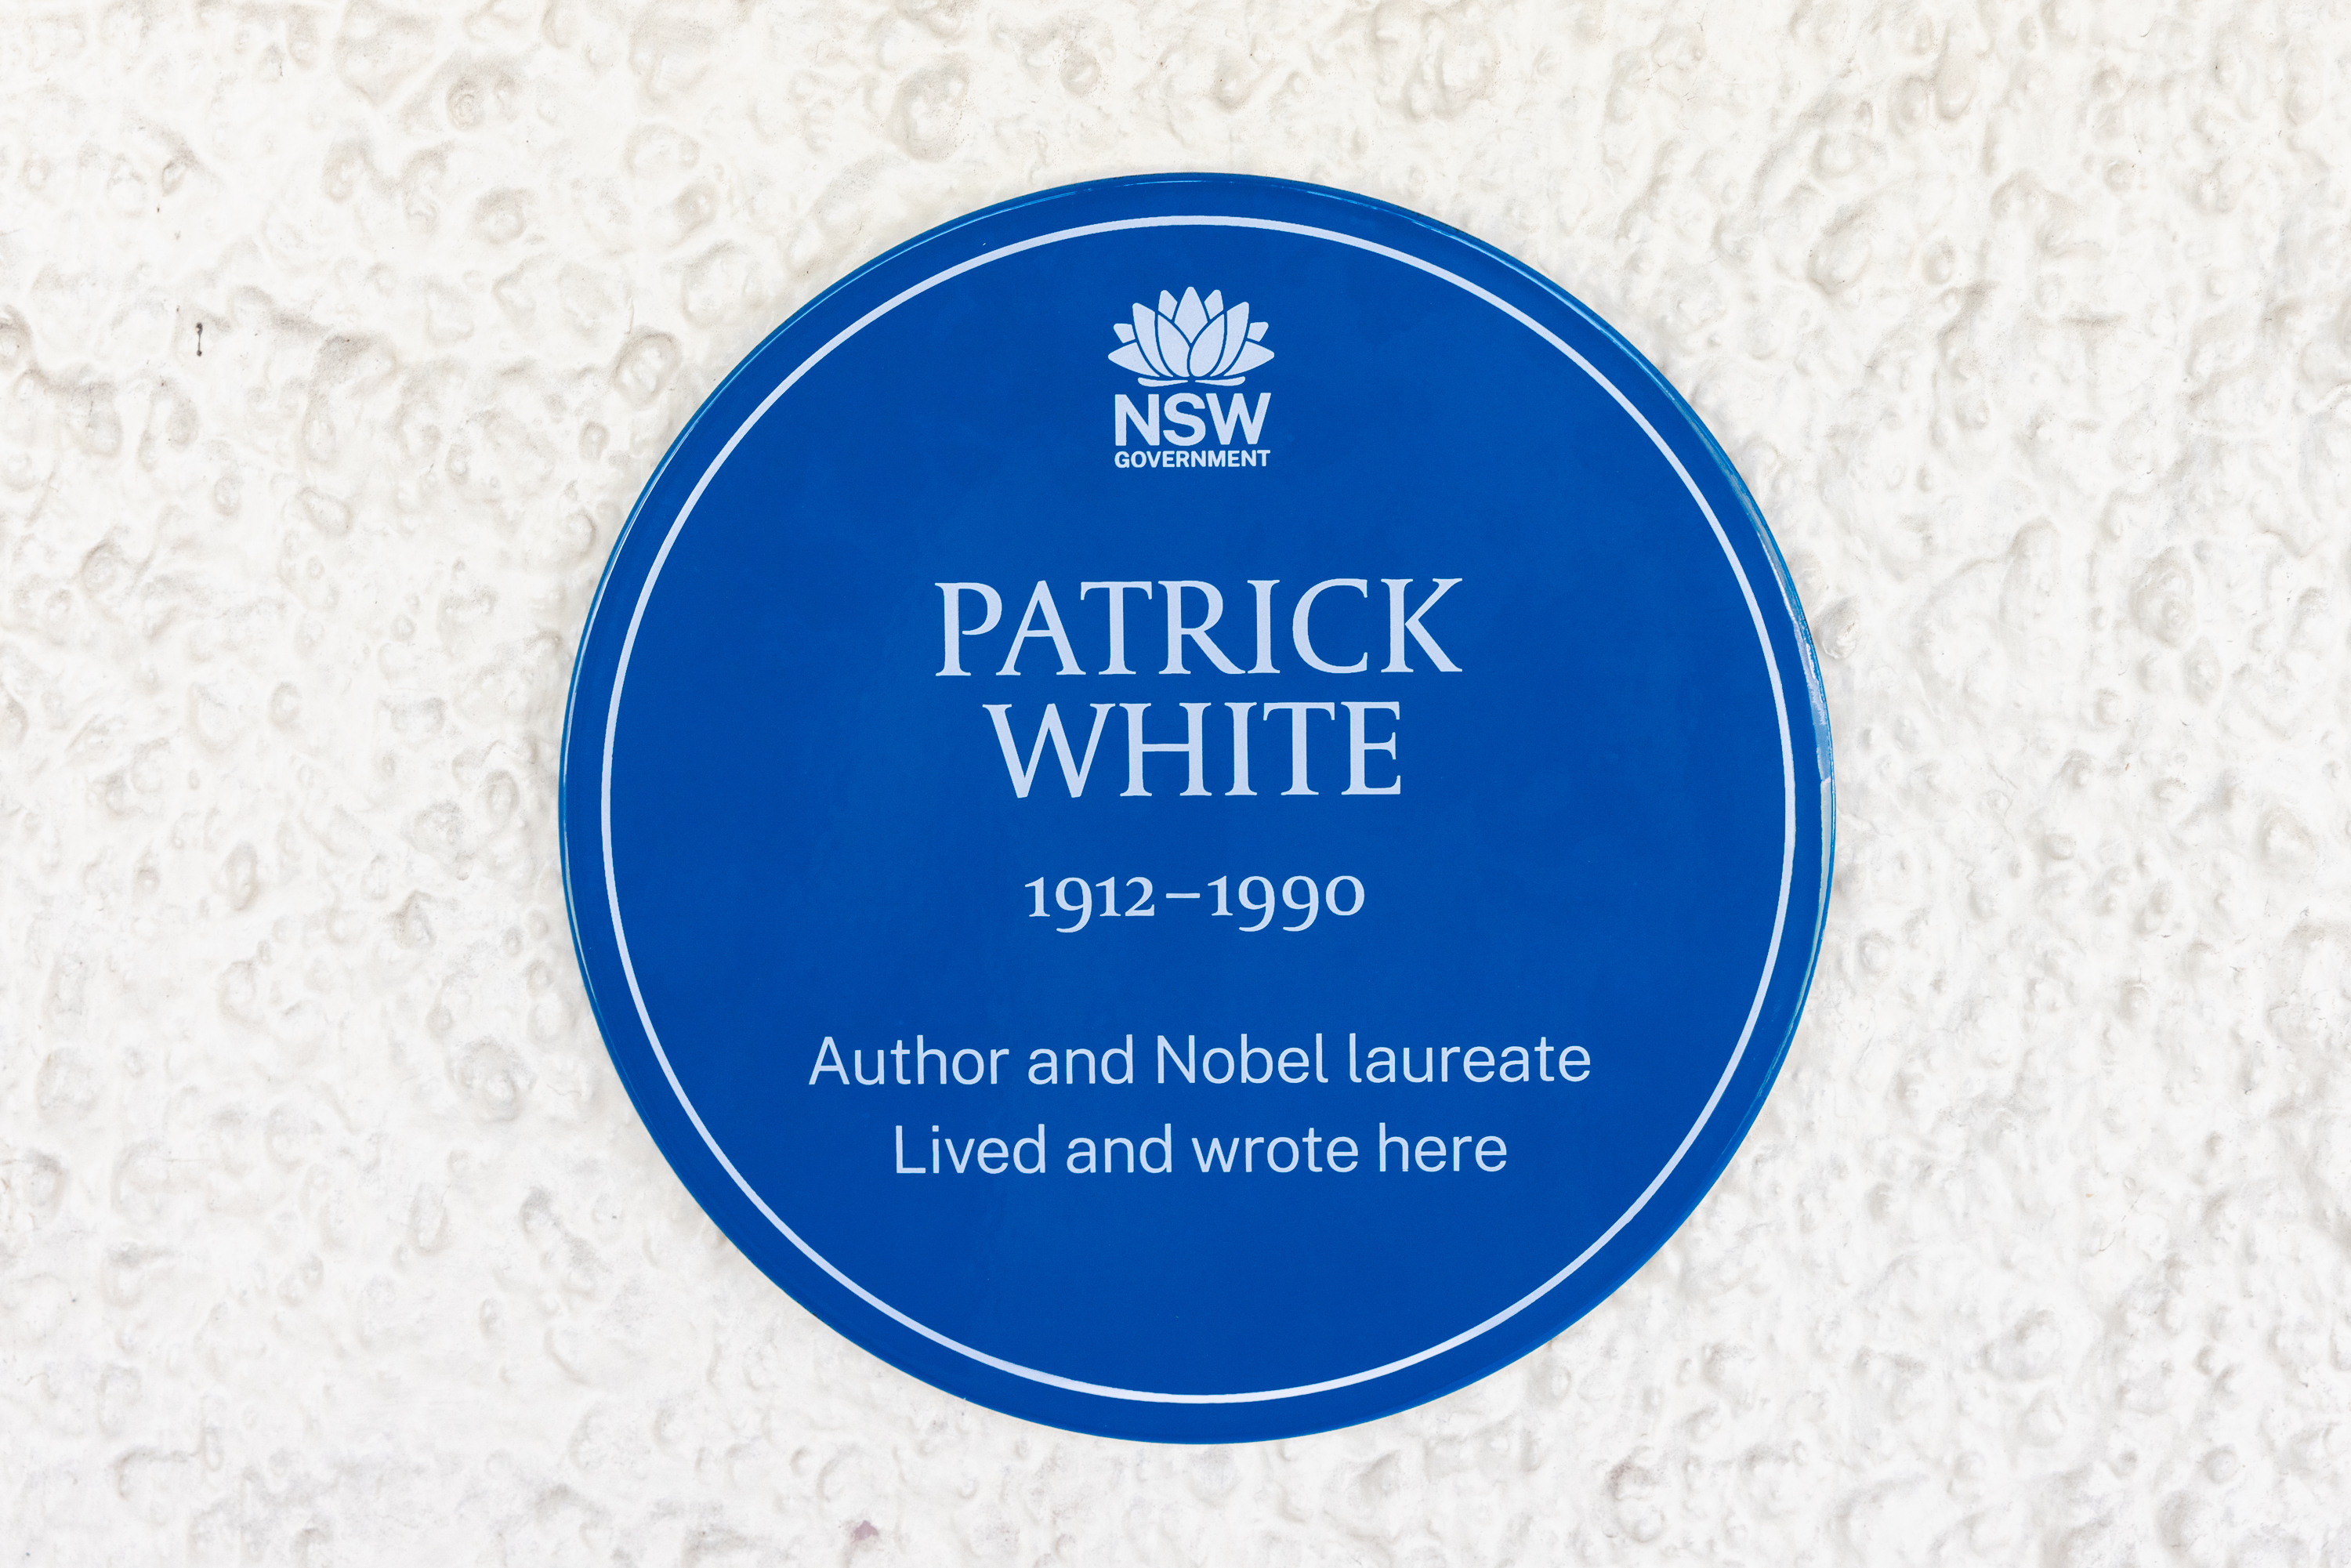 Image 5 of 6 - A photo of the Patrick White blue plaque